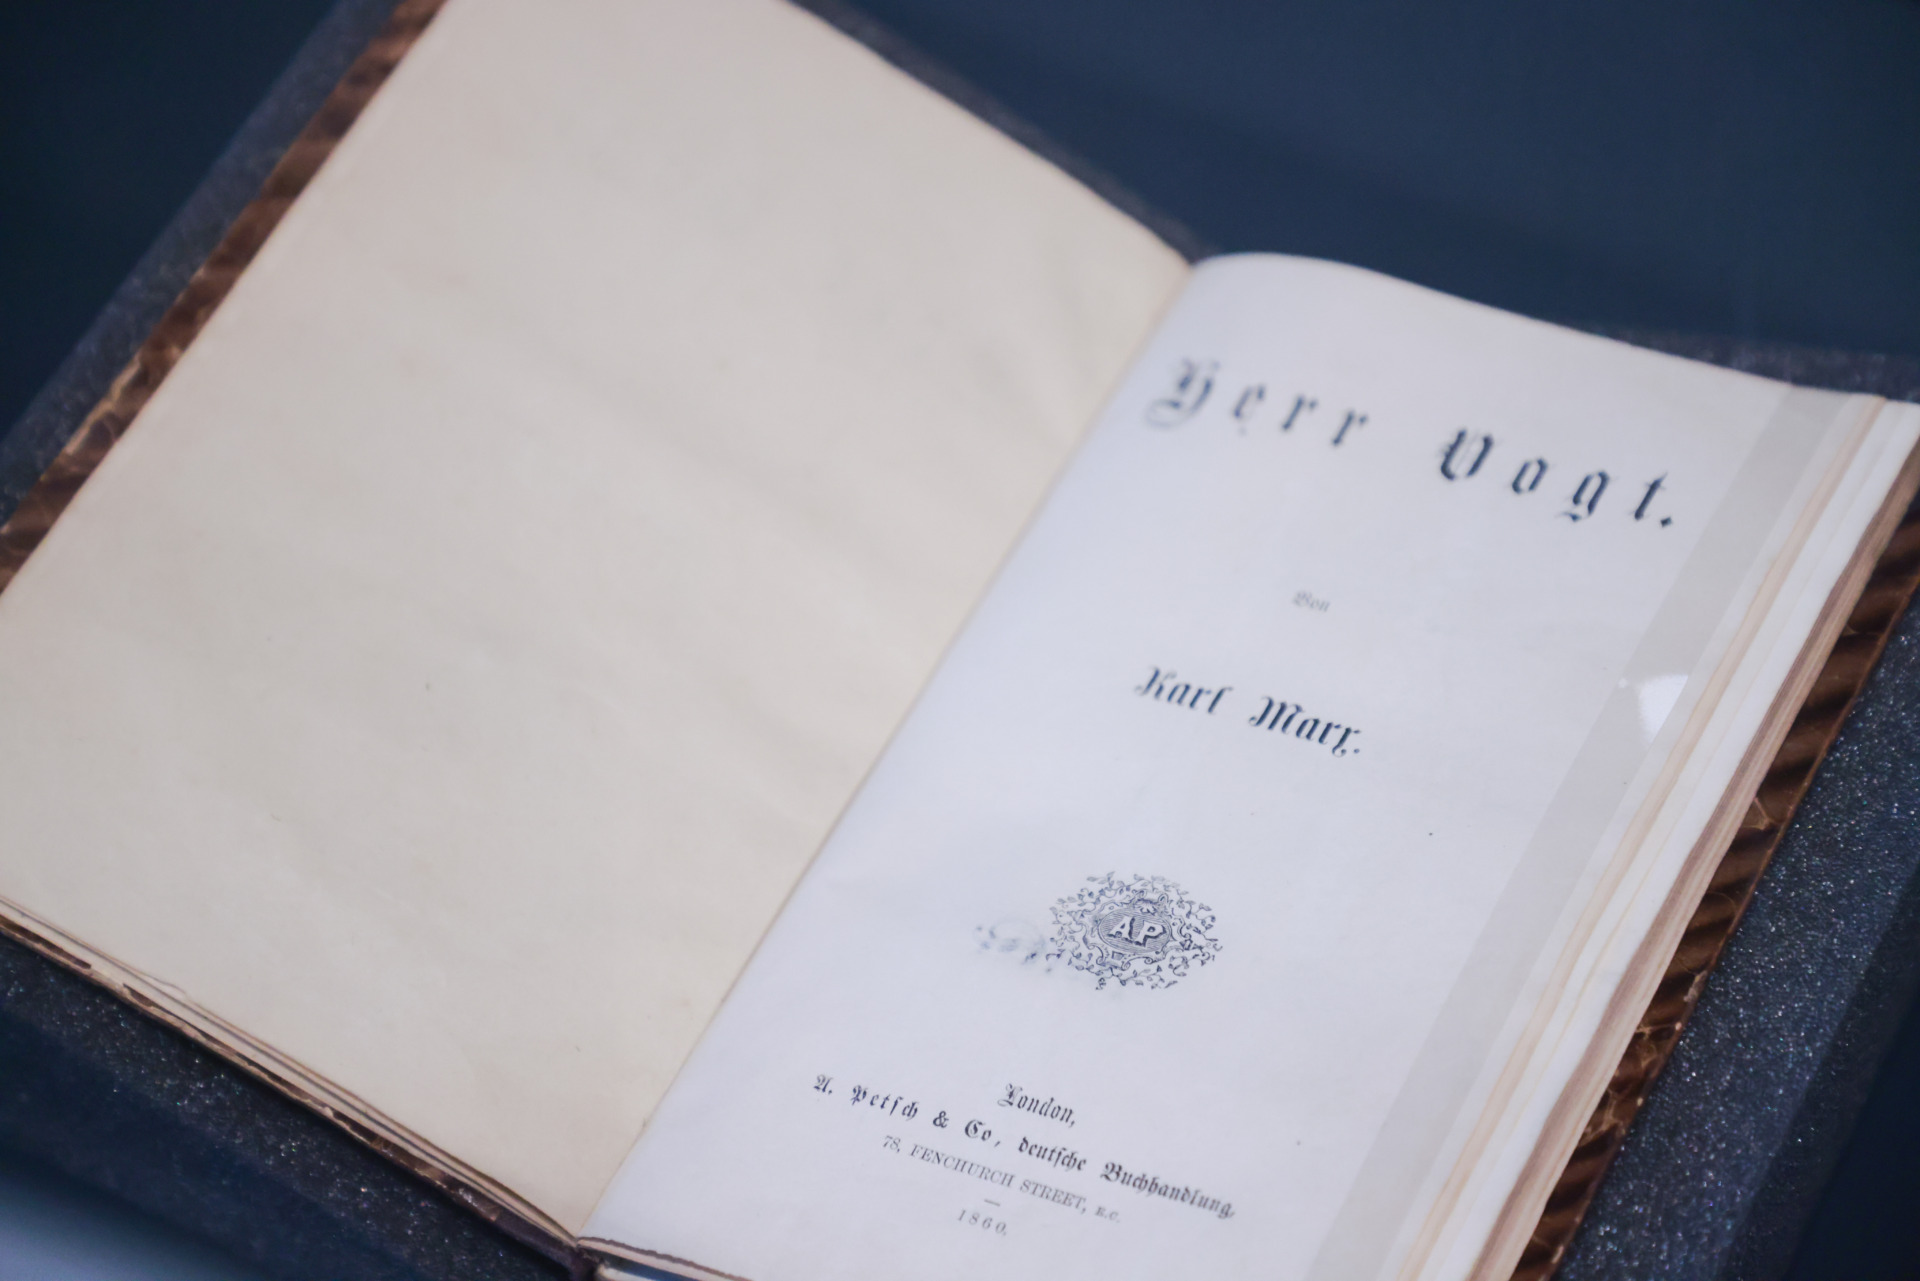 Karl Marx's Stolen Works Recovered for Polish Libraries